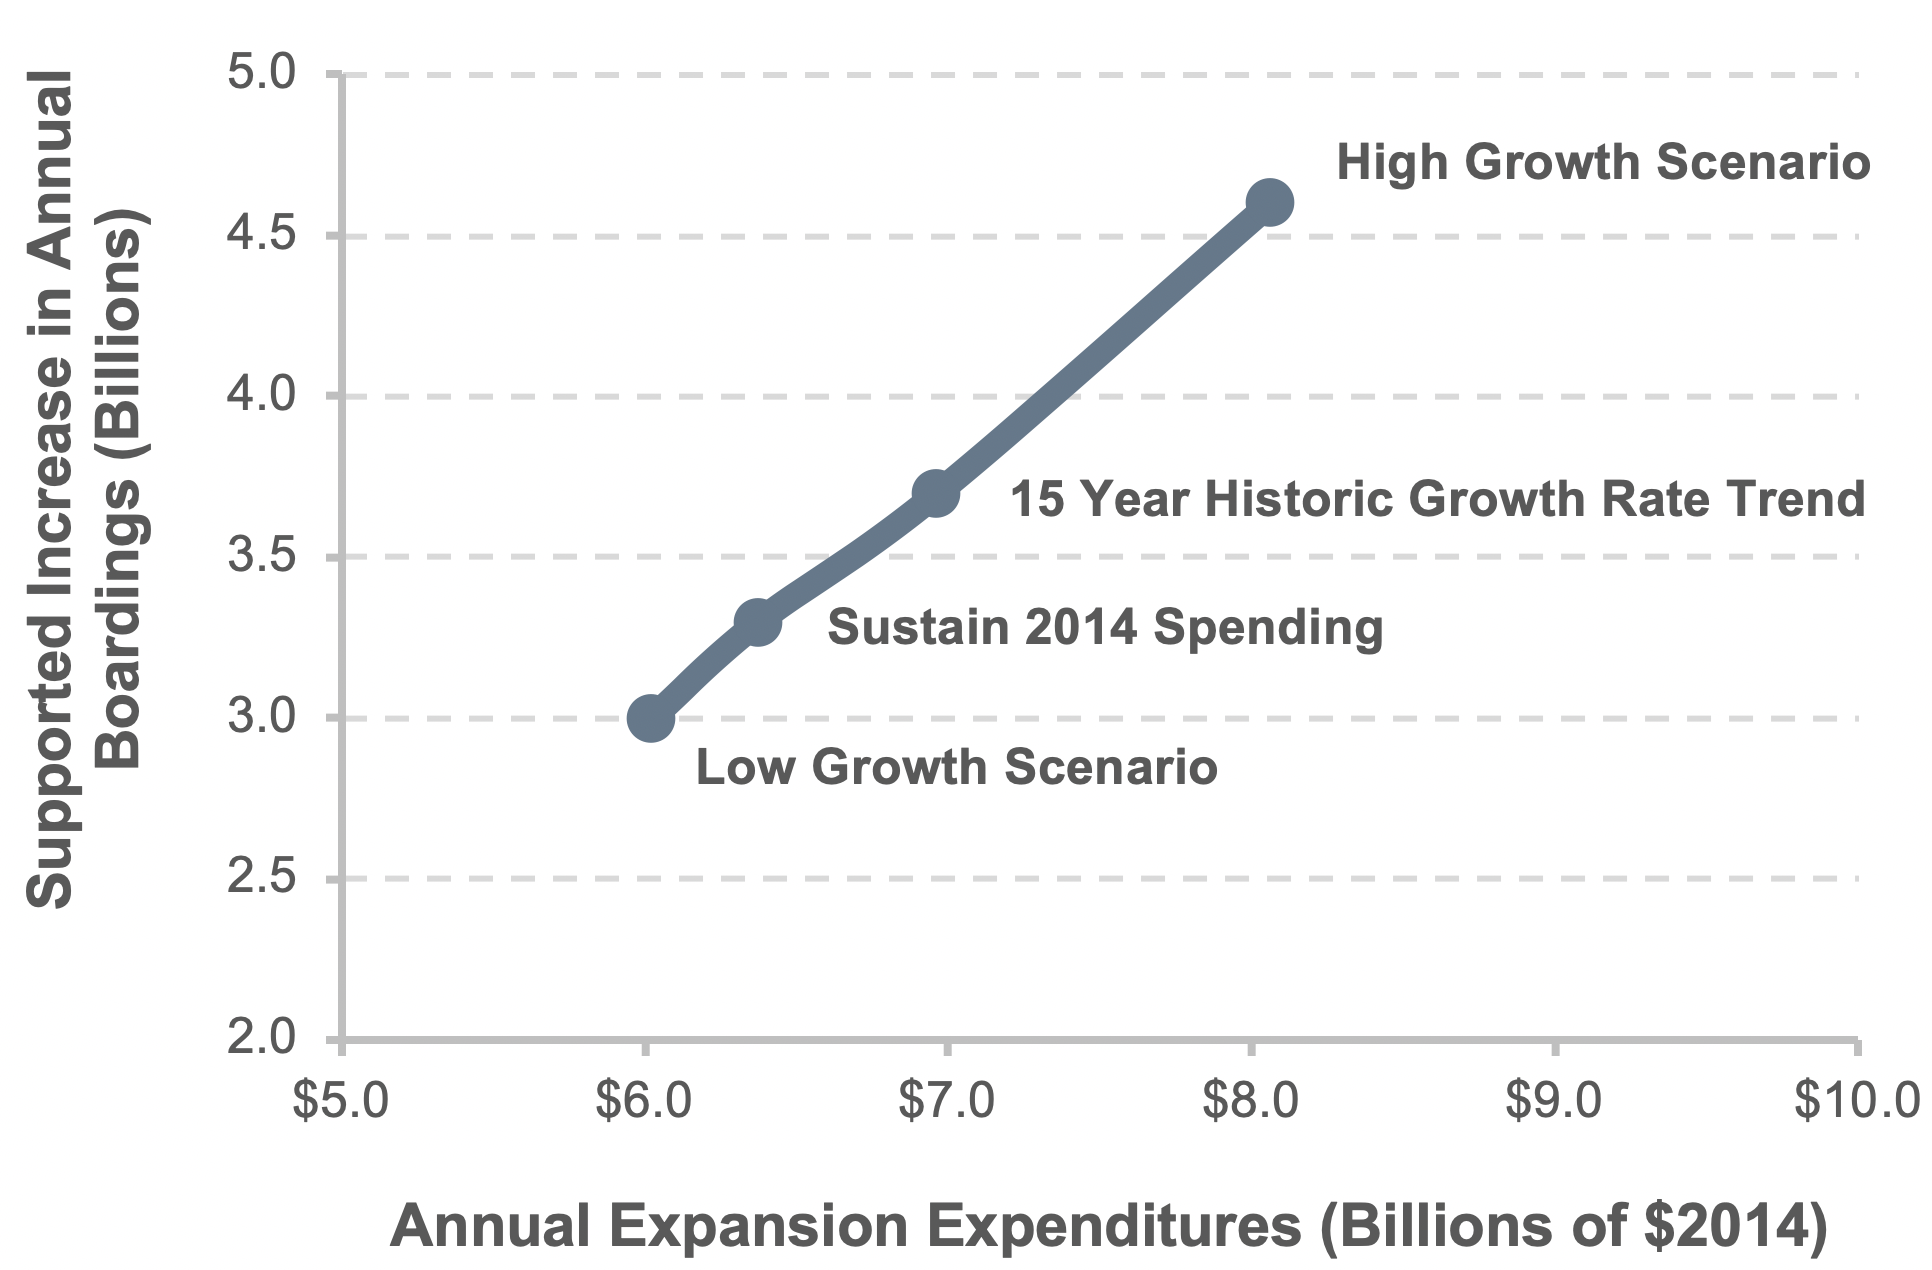 A scatter plot shows the supported increase in annual boardings (in billions) versus annual expansion expenditures in billions of 2014 dollars for four different investment spending scenarios. A line connects the data points to show a relationship between the two values. The line is approximately straight and is trending upwards. The Low Growth Scenario has an annual boardings increase of 3 billion and annual expenditures of $6 billion. The Sustain 2014 Spending scenario has an annual boardings increase of 3.3 billion and annual expenditures of $6.4 billion. The 15 Year Historic Growth Rate Trend scenario has an annual boardings increase of 3.7 billion and annual expenditures of $7.0 billion. The High Growth scenario has an annual boardings increase of 4.6 billion and annual expenditures of $8.1 billion. Source: Transit Economic Requirements Model.